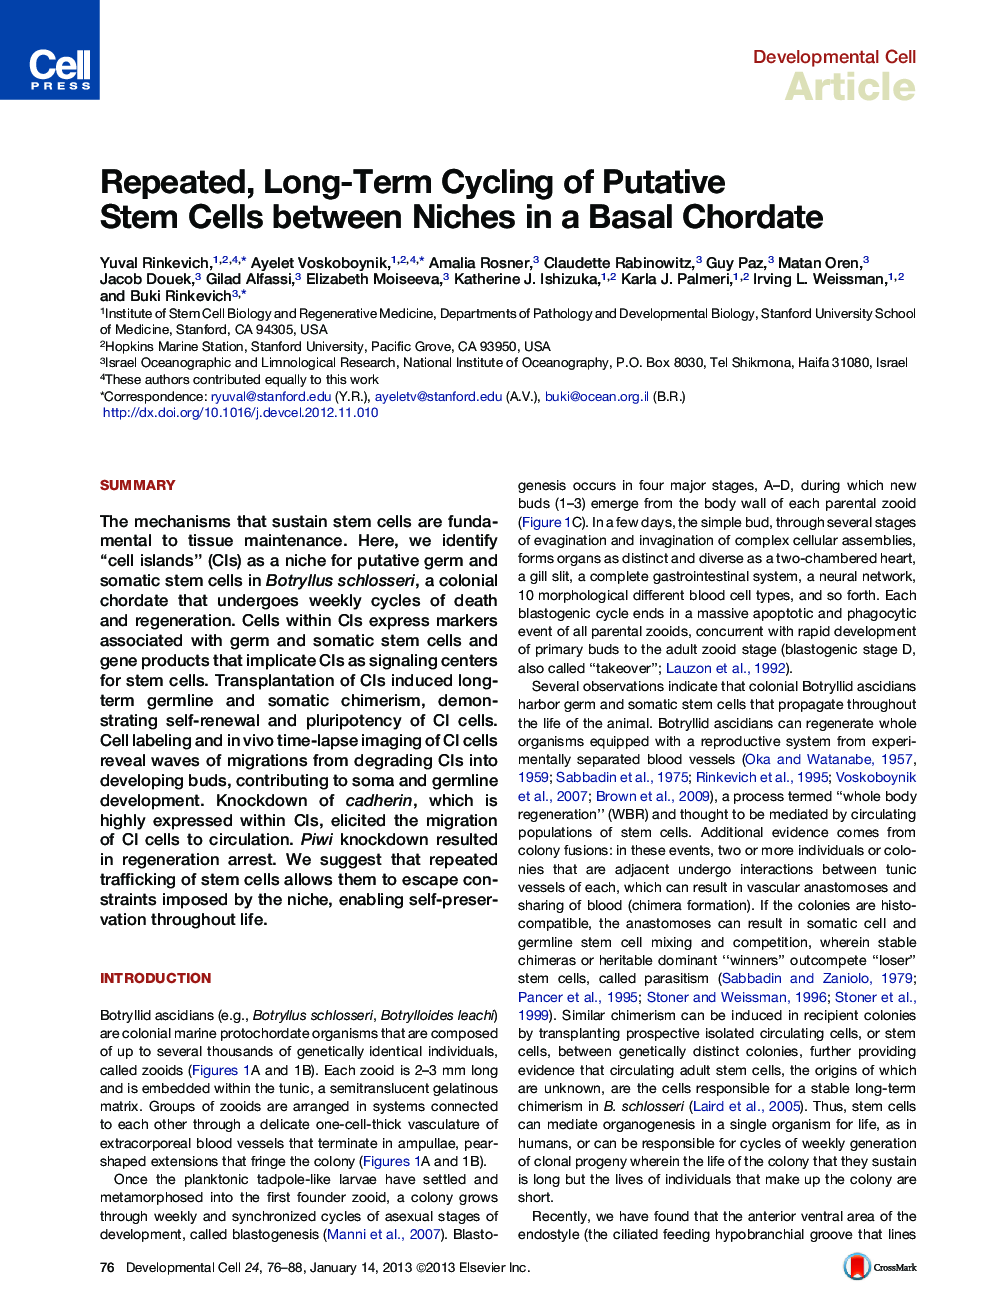 Repeated, Long-Term Cycling of Putative Stem Cells between Niches in a Basal Chordate